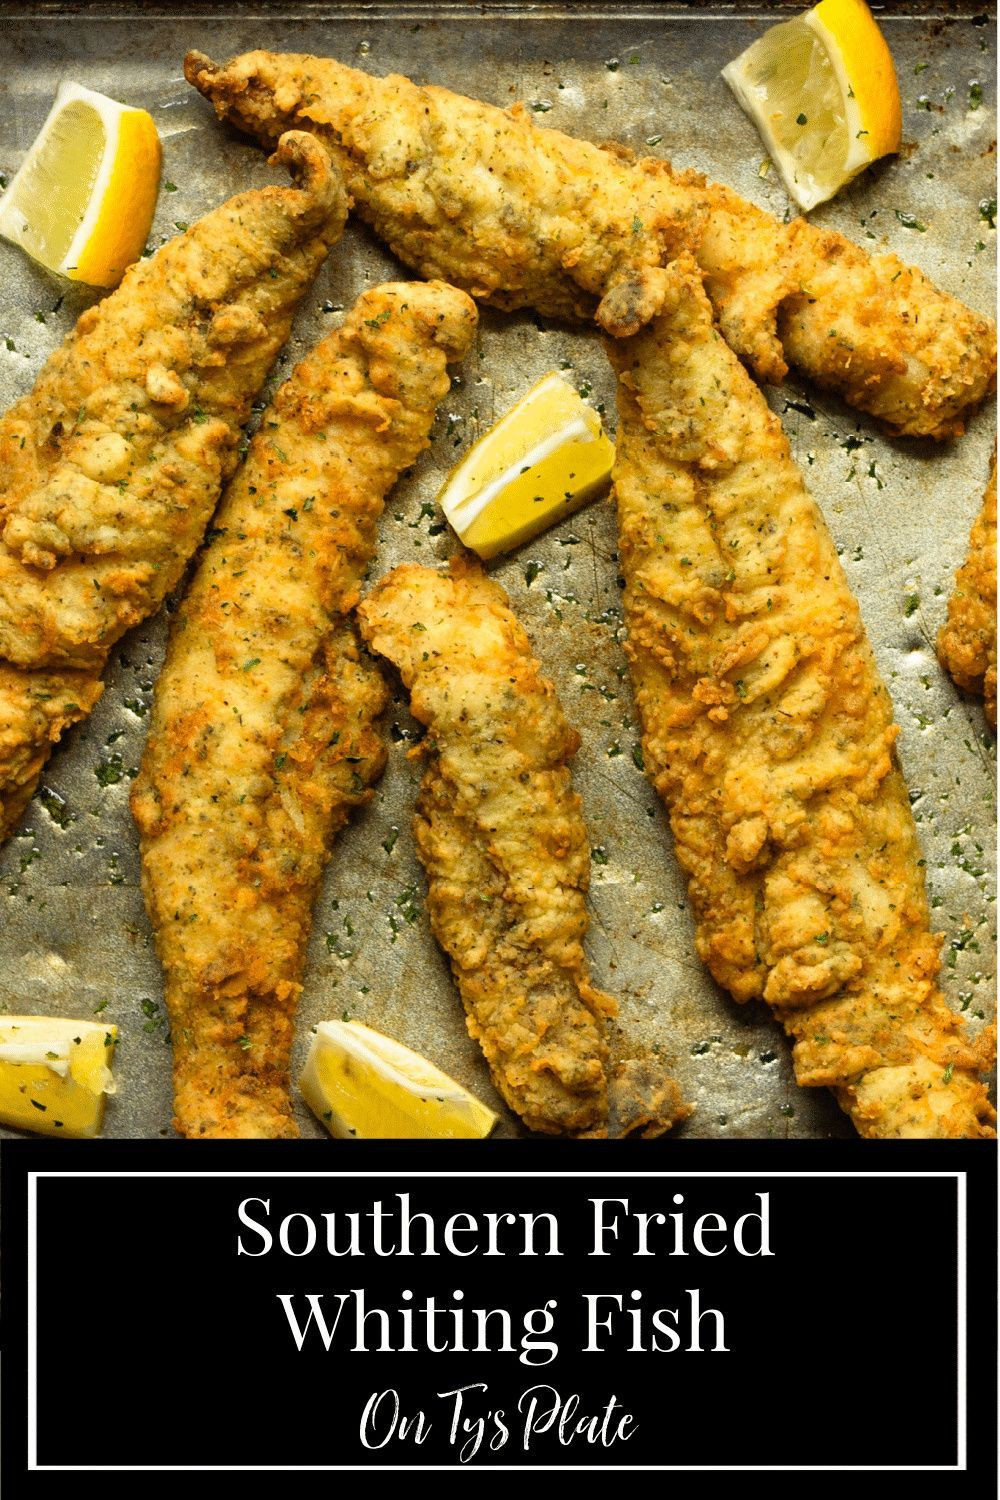 Southern Fried Whiting Fish Recipes
 Southern Fried Whiting Fish Ty s Plate in 2020